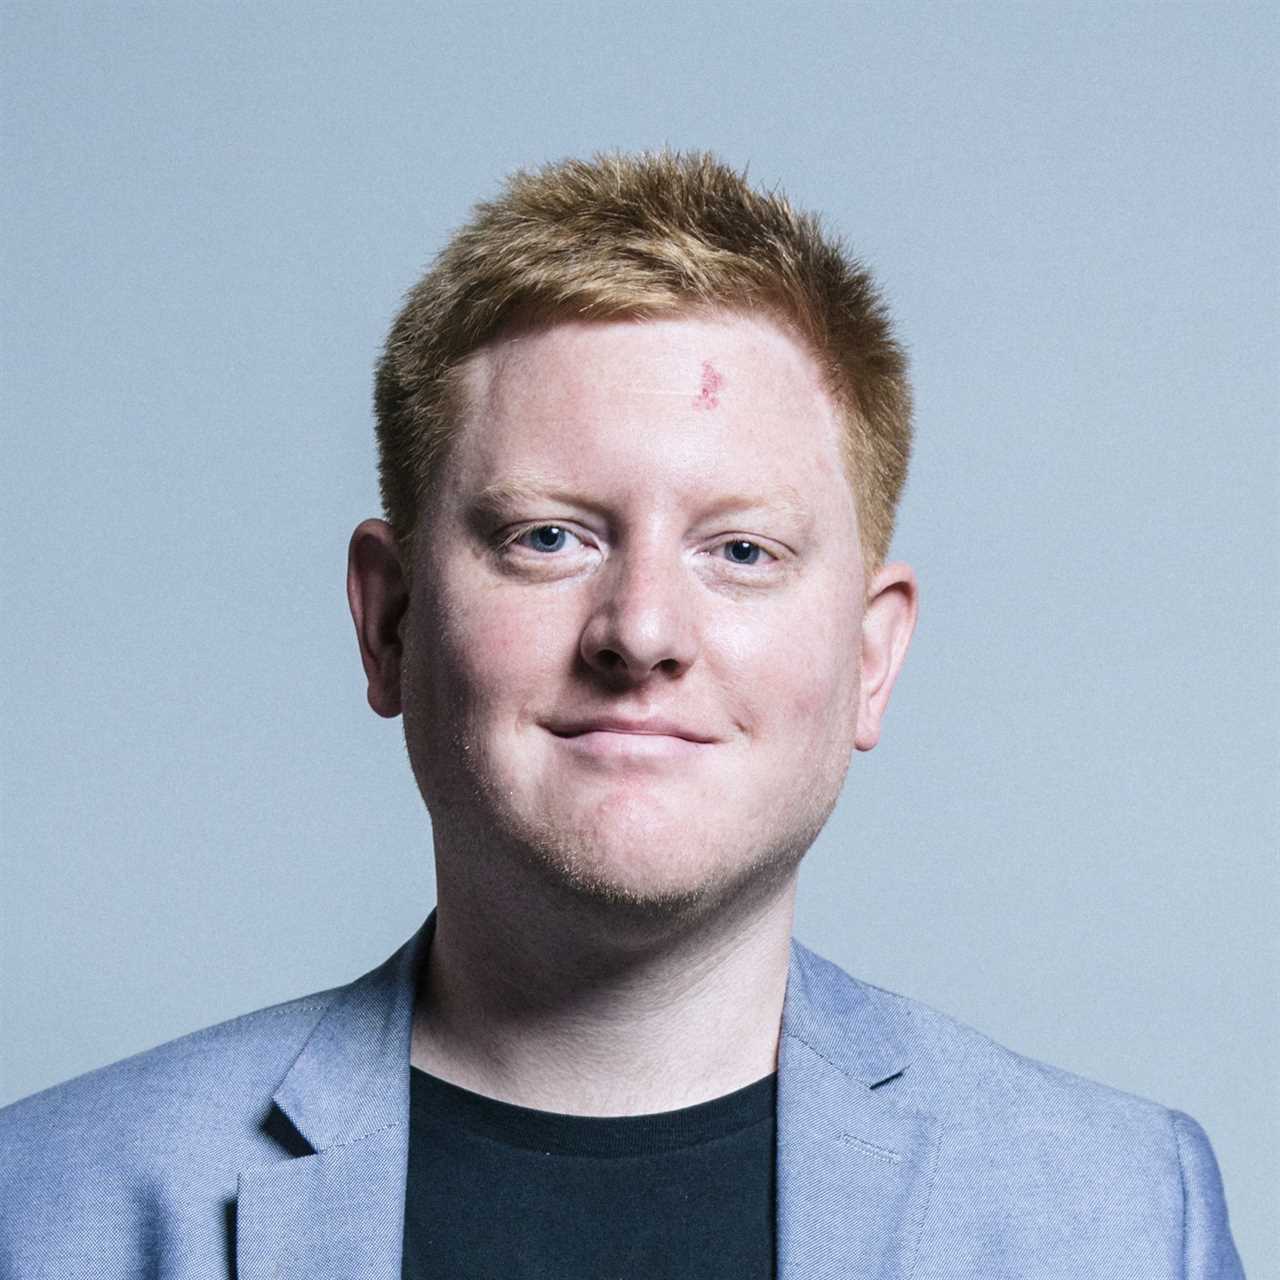 Ex-Labour MP Jared O’Mara faces jail after being found guilty of fraud to fund cocaine habit